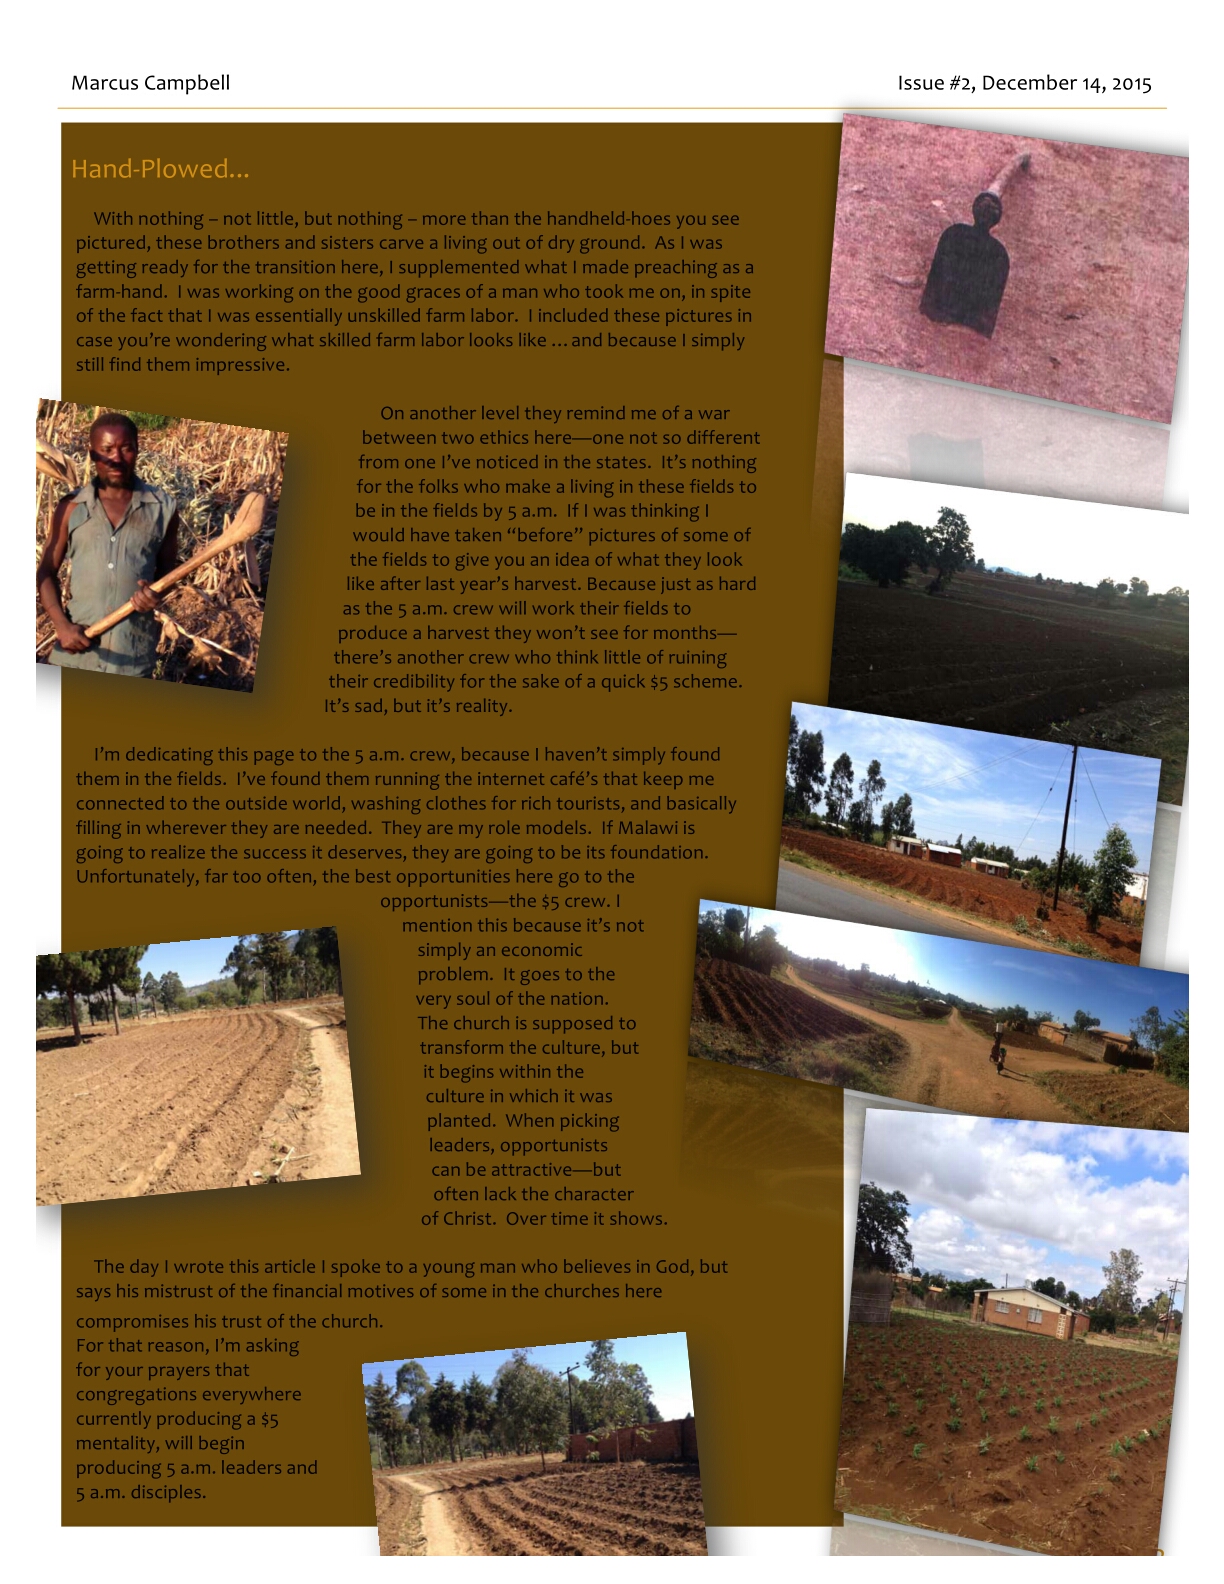 mission-malawi-newsletter-issue-2-date-12-14-15-smaller-file [2]